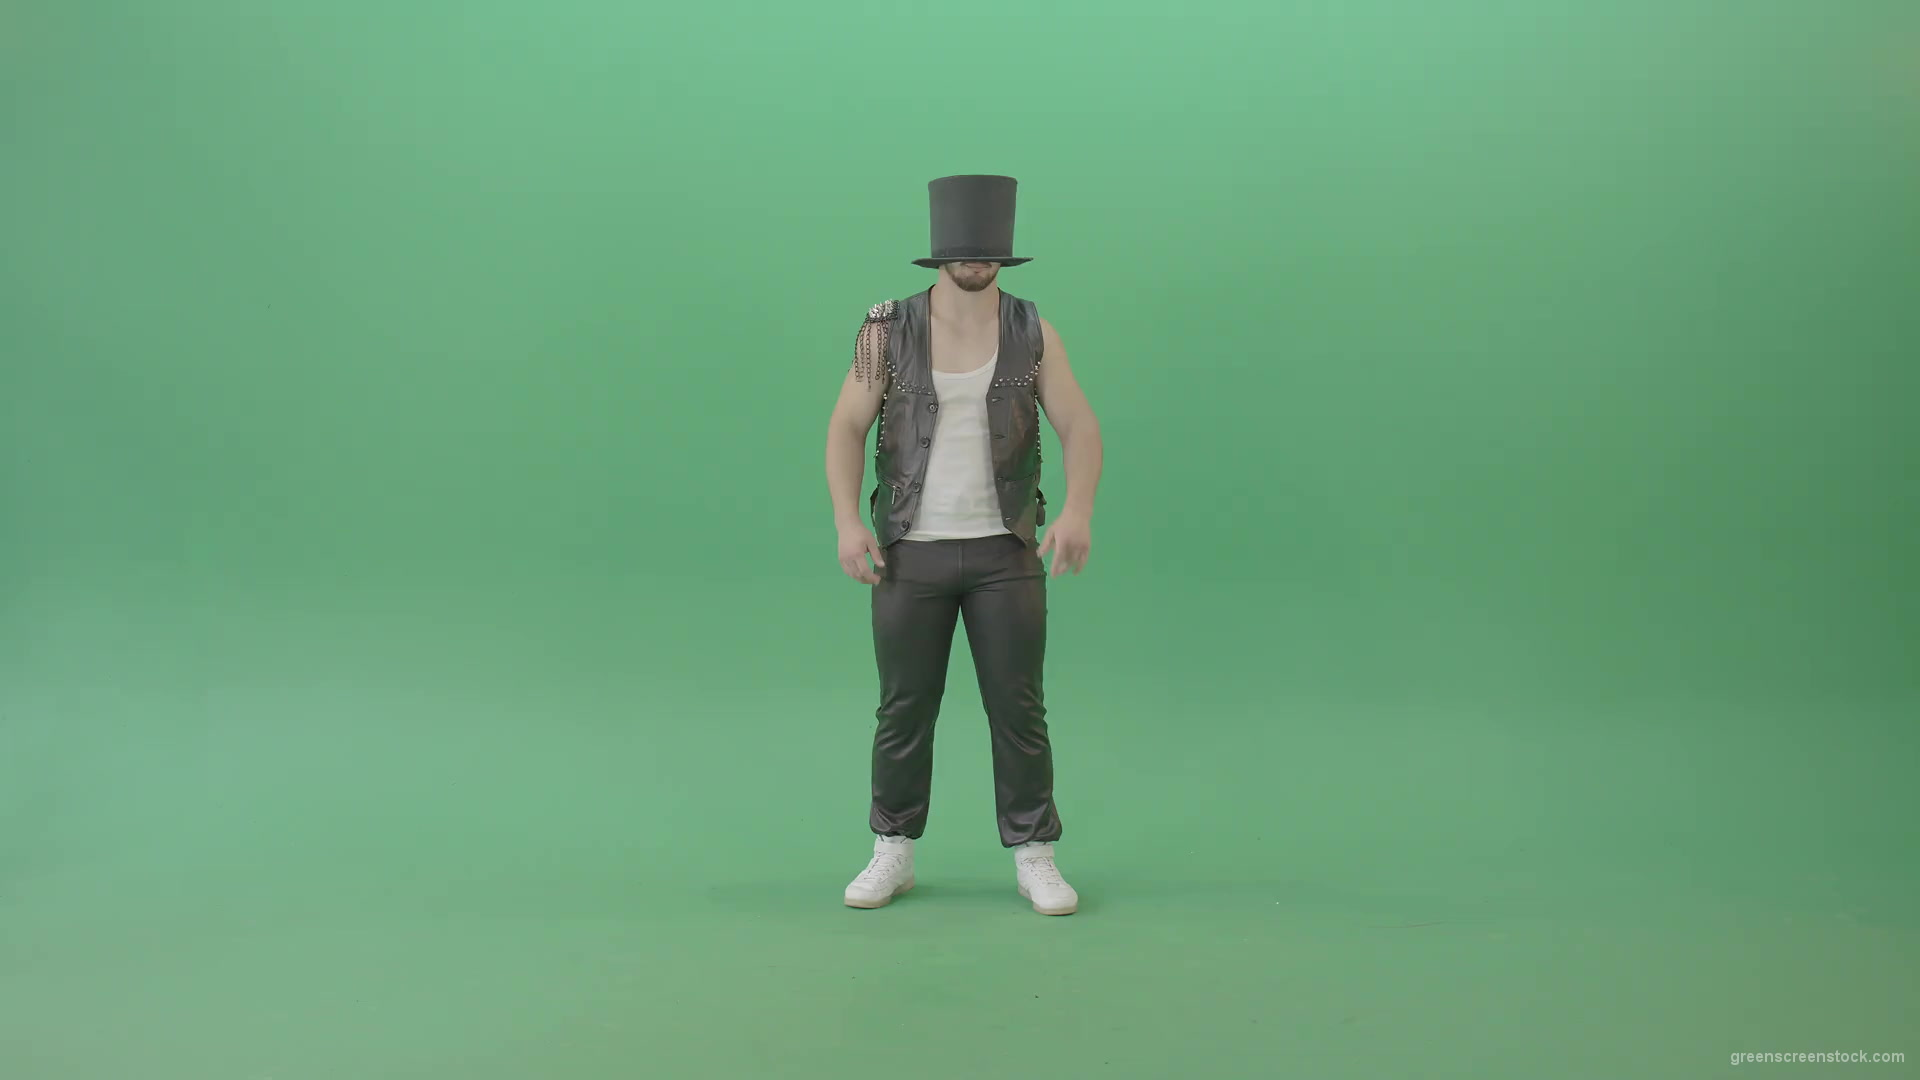 Funny-Man-in-Cylinder-Hat-and-black-fetish-costume-dancing-and-jumping-over-Green-Screen-4K-Video-Footage-1920_001 Green Screen Stock